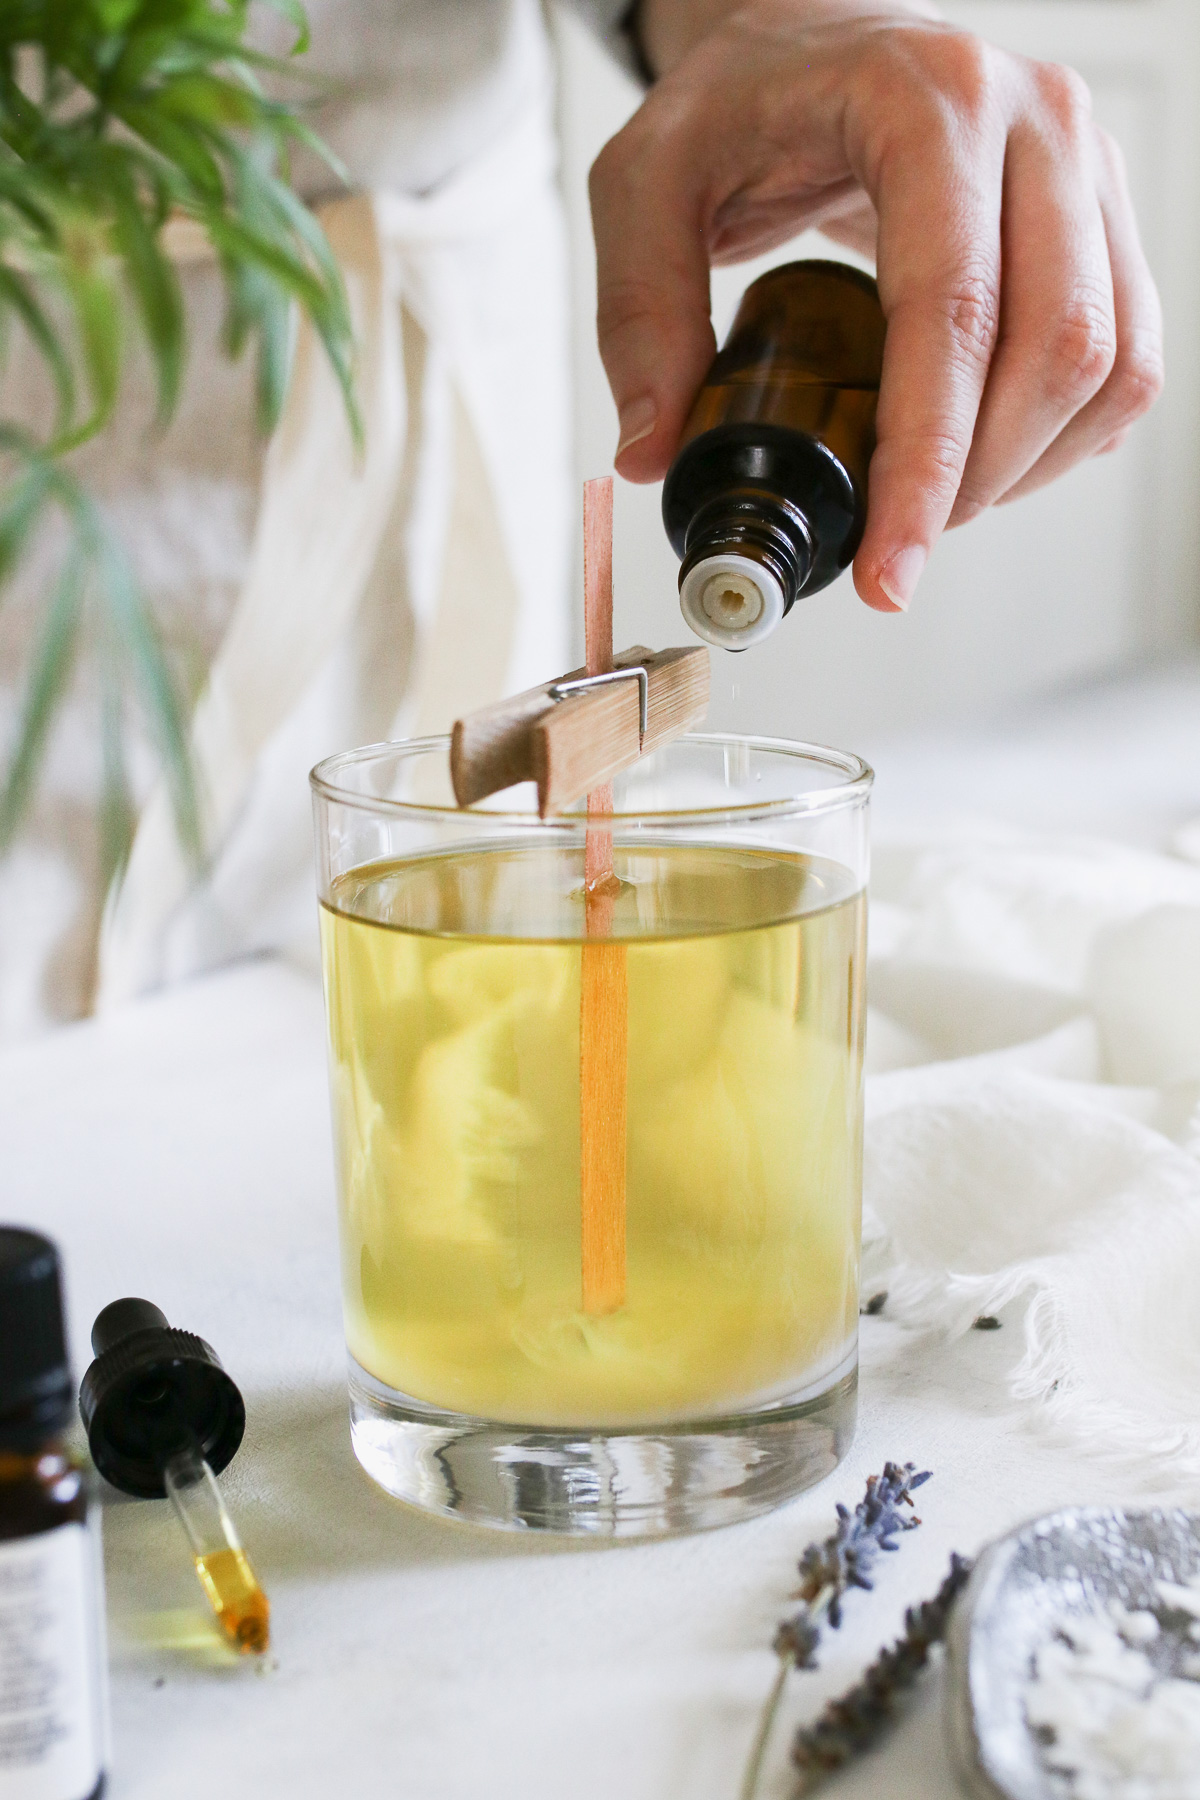 Here's everything you need to know to start making your own DIY essential oil candles. Learn which essential oils to use, how much to add and and when.